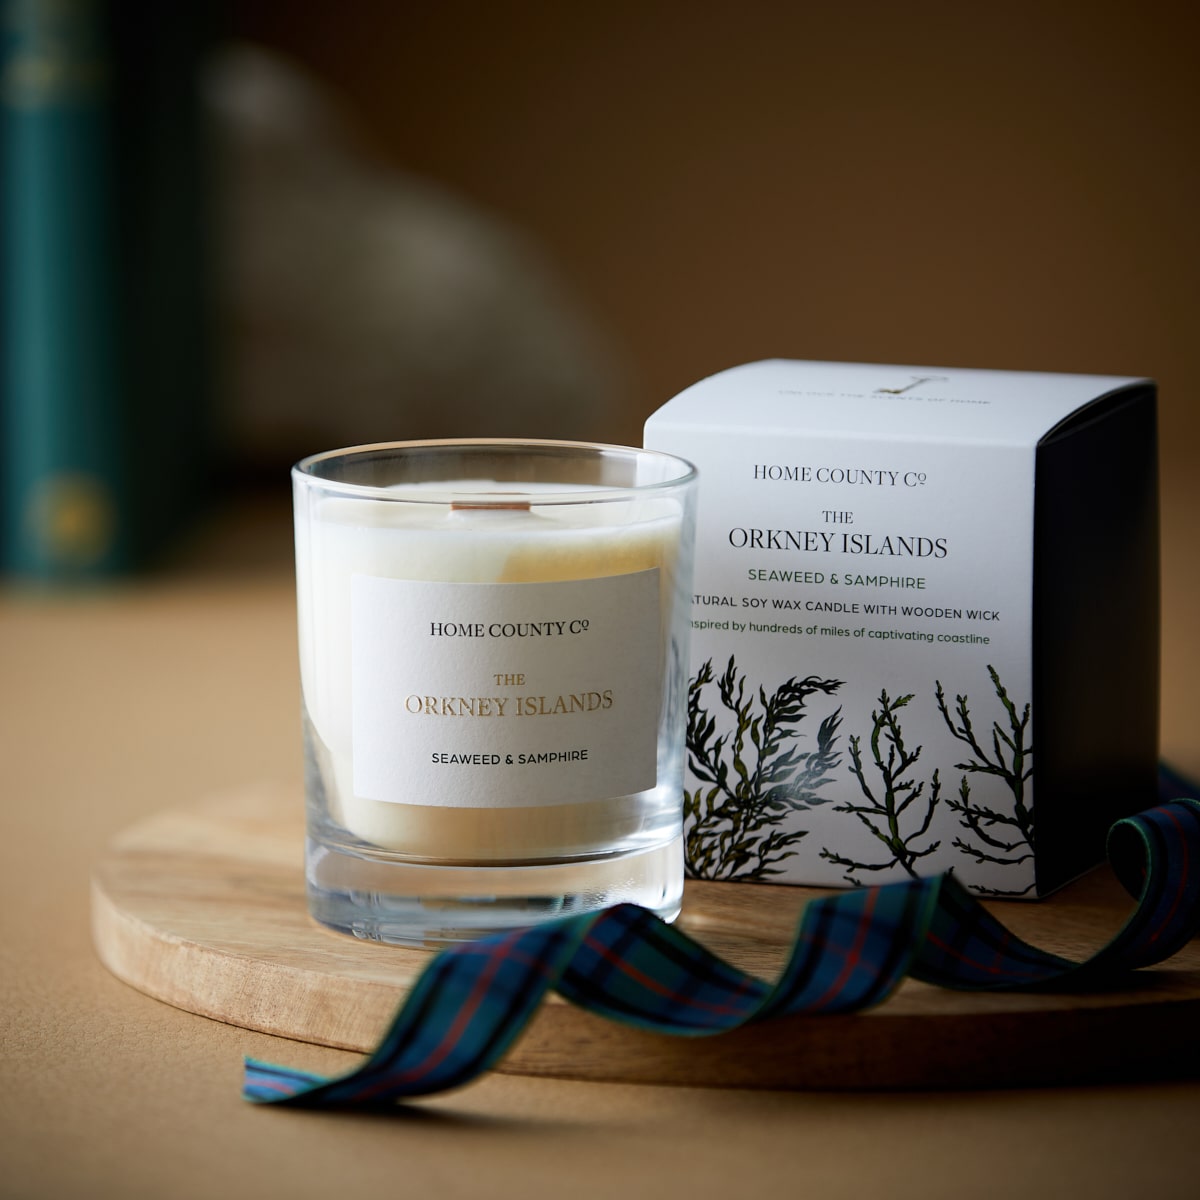 An Orkney Islands seaweed and samphire scented candle from the Home County Co is shown next to its illustrated candle packaging